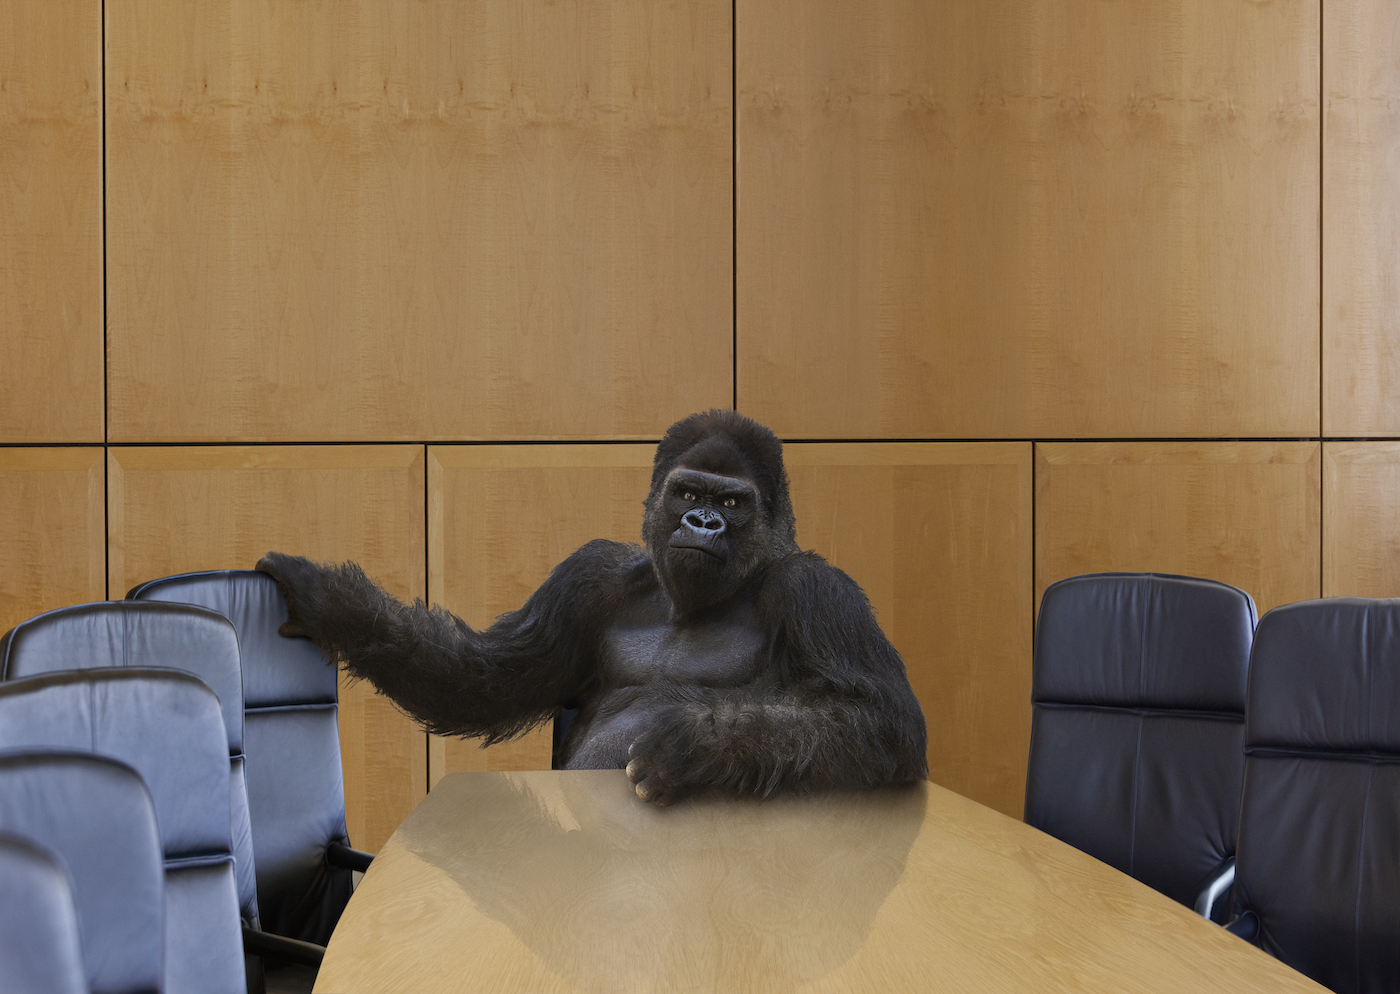 A menacing gorilla sits at the head of the conference room table and invites the viewer to sit next to him.